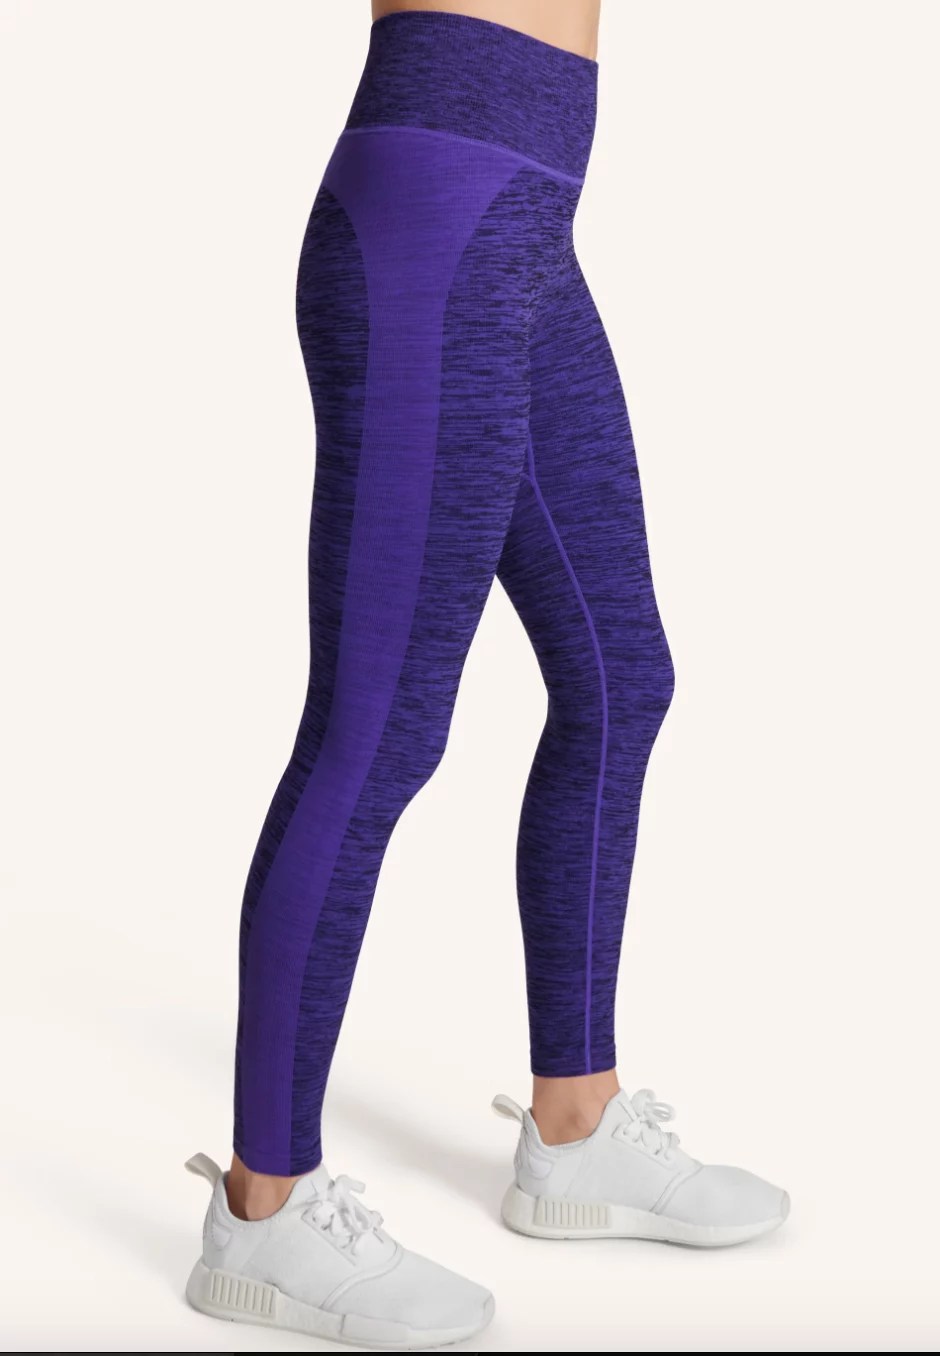 A model's lower body showing a pair of purple ankle length leggings with white sneakers.